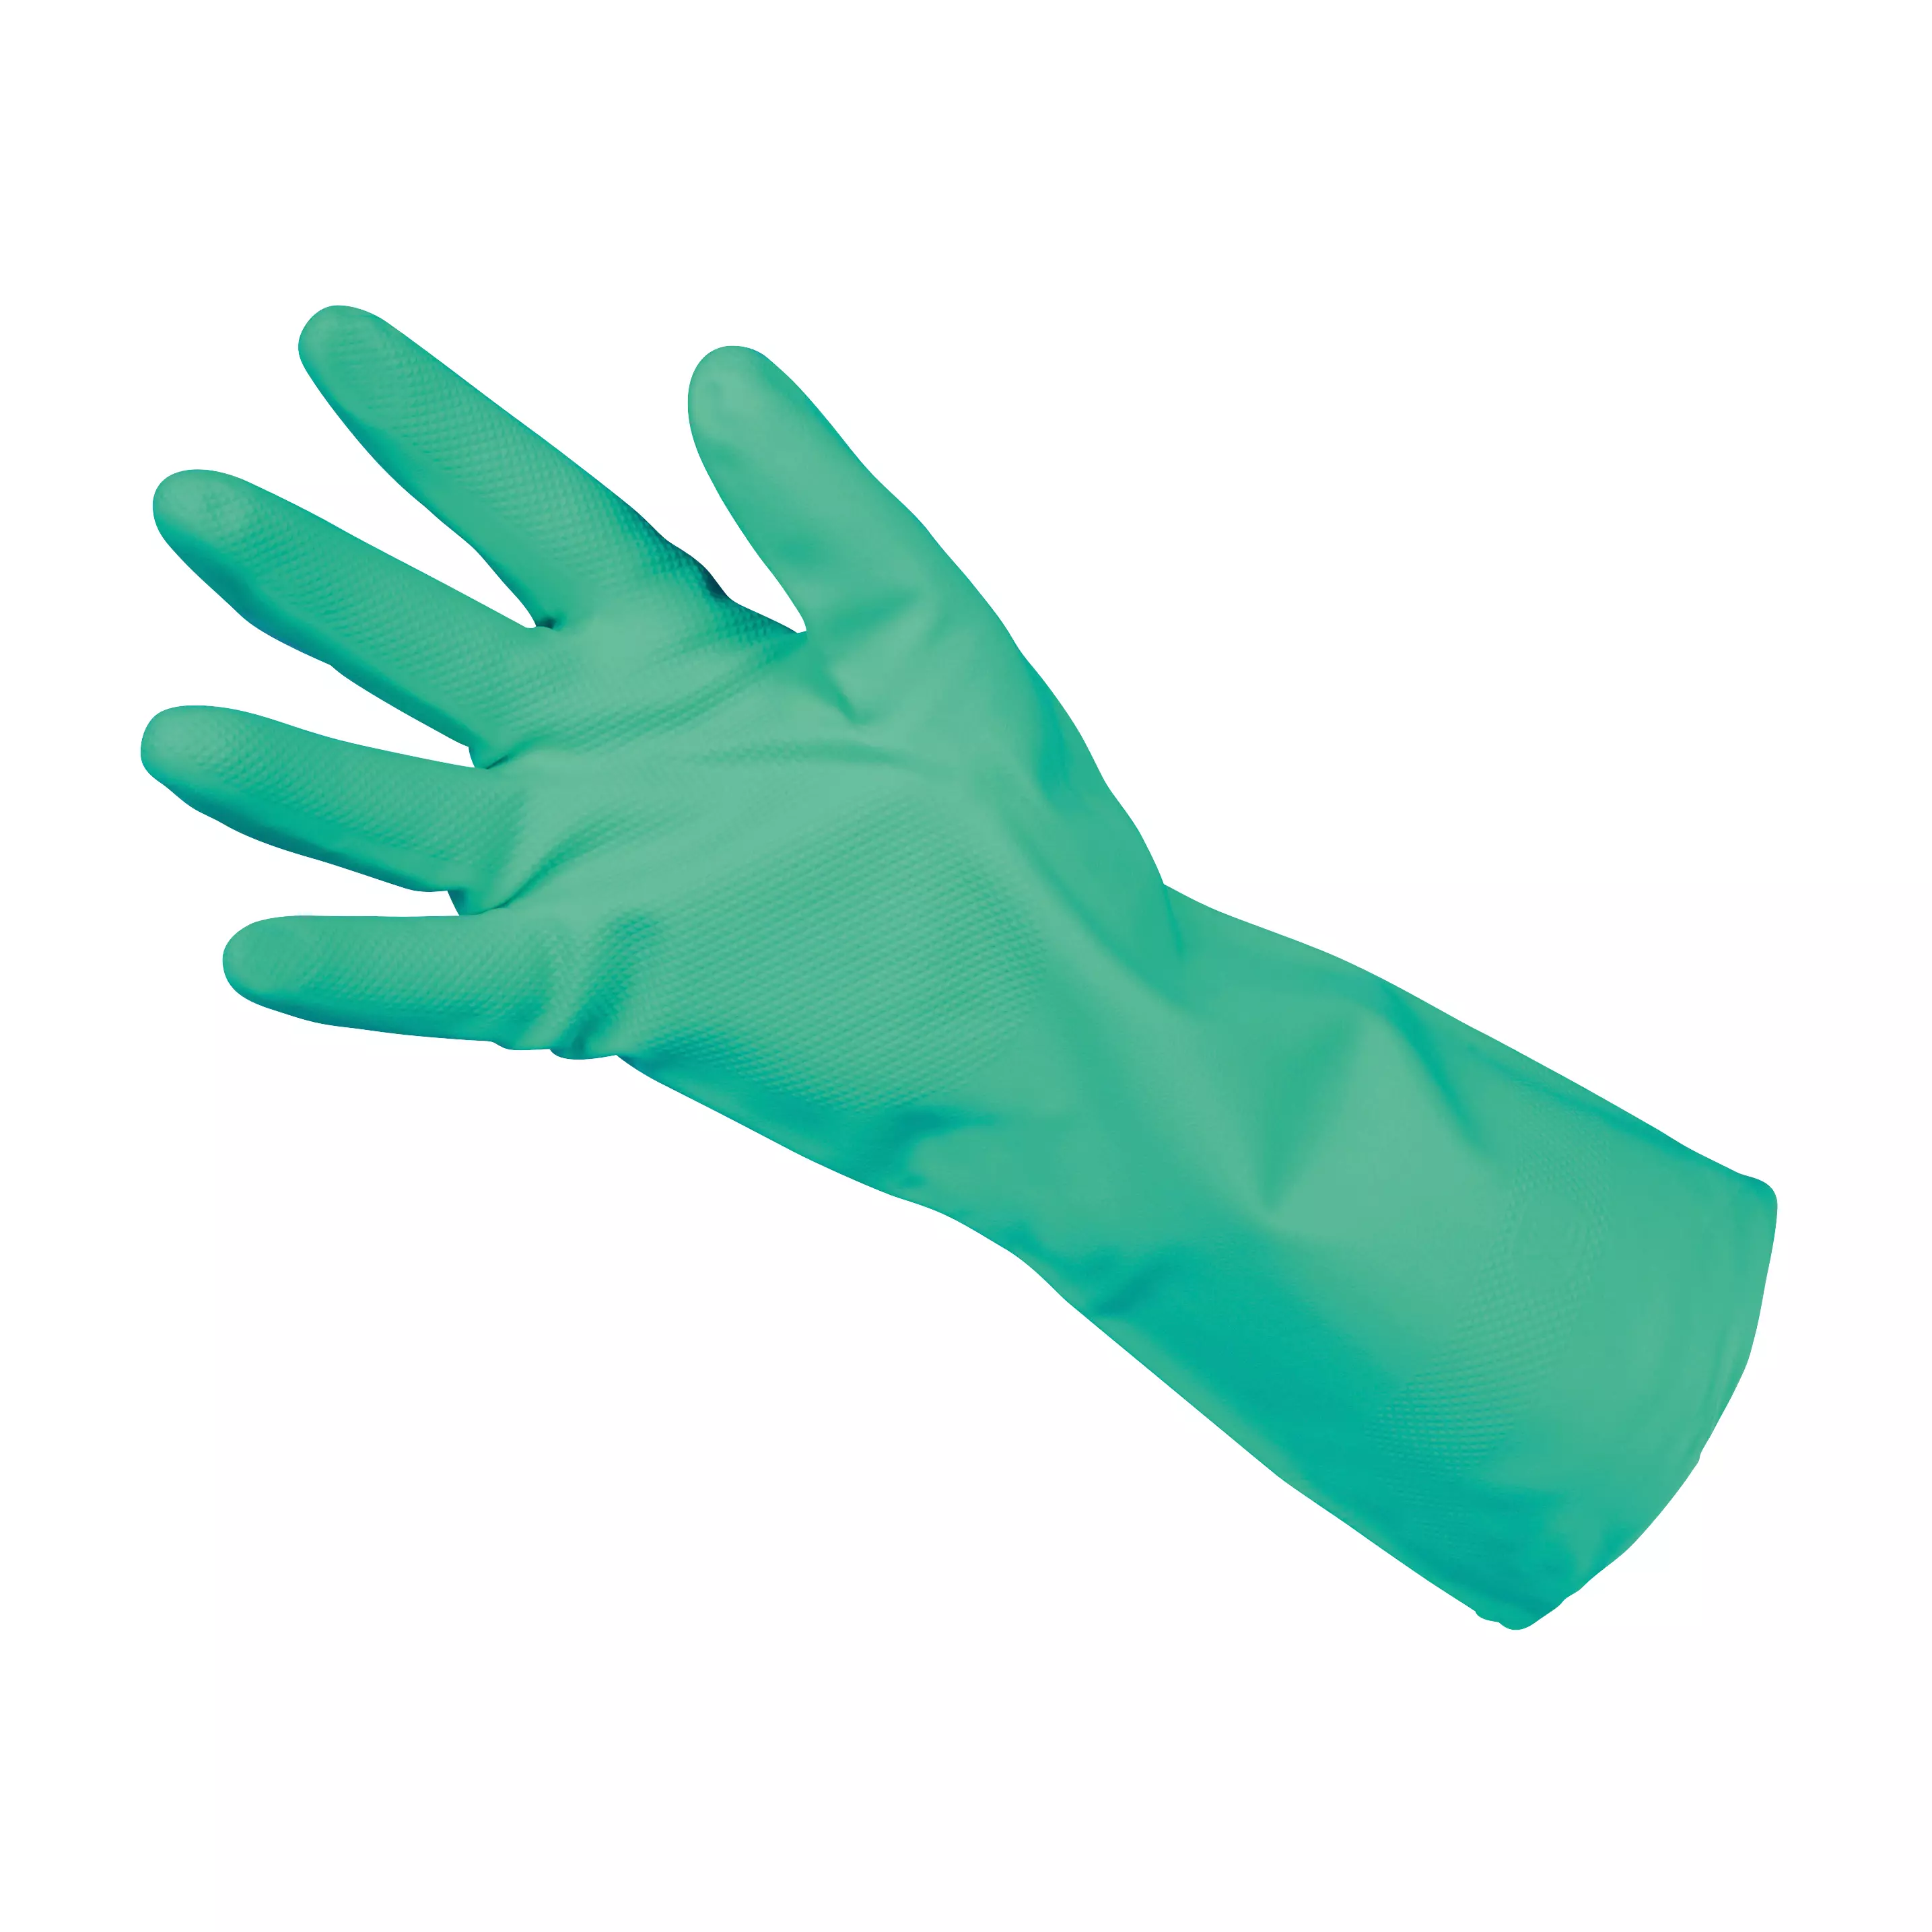 Chemical protective glove Nitrile 33, 12 pairs - Green, 7